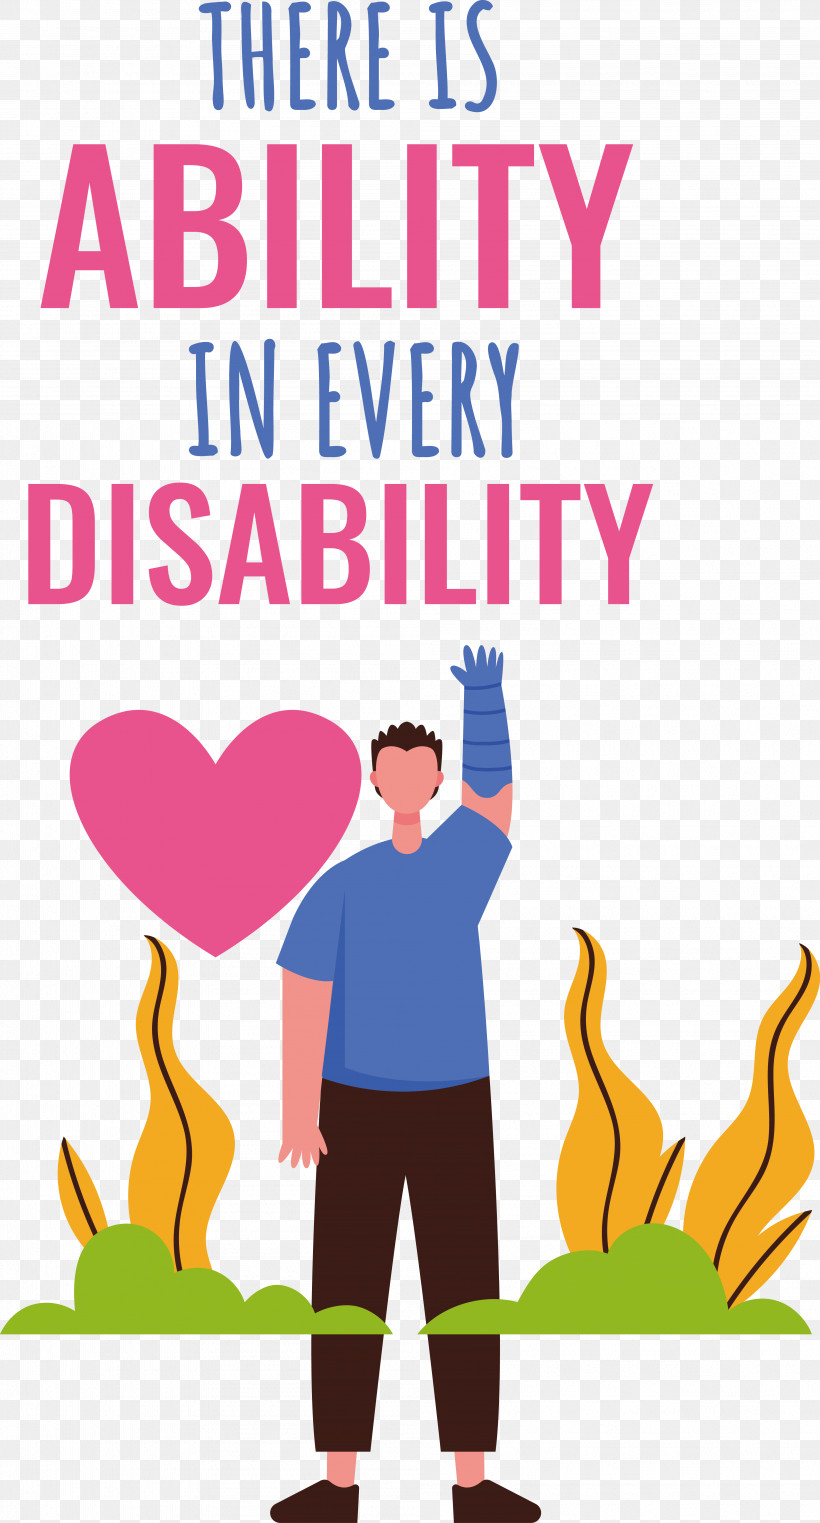 International Disability Day Never Give Up International Day Disabled Persons, PNG, 4008x7449px, International Disability Day, Disabled Persons, International Day, Never Give Up Download Free